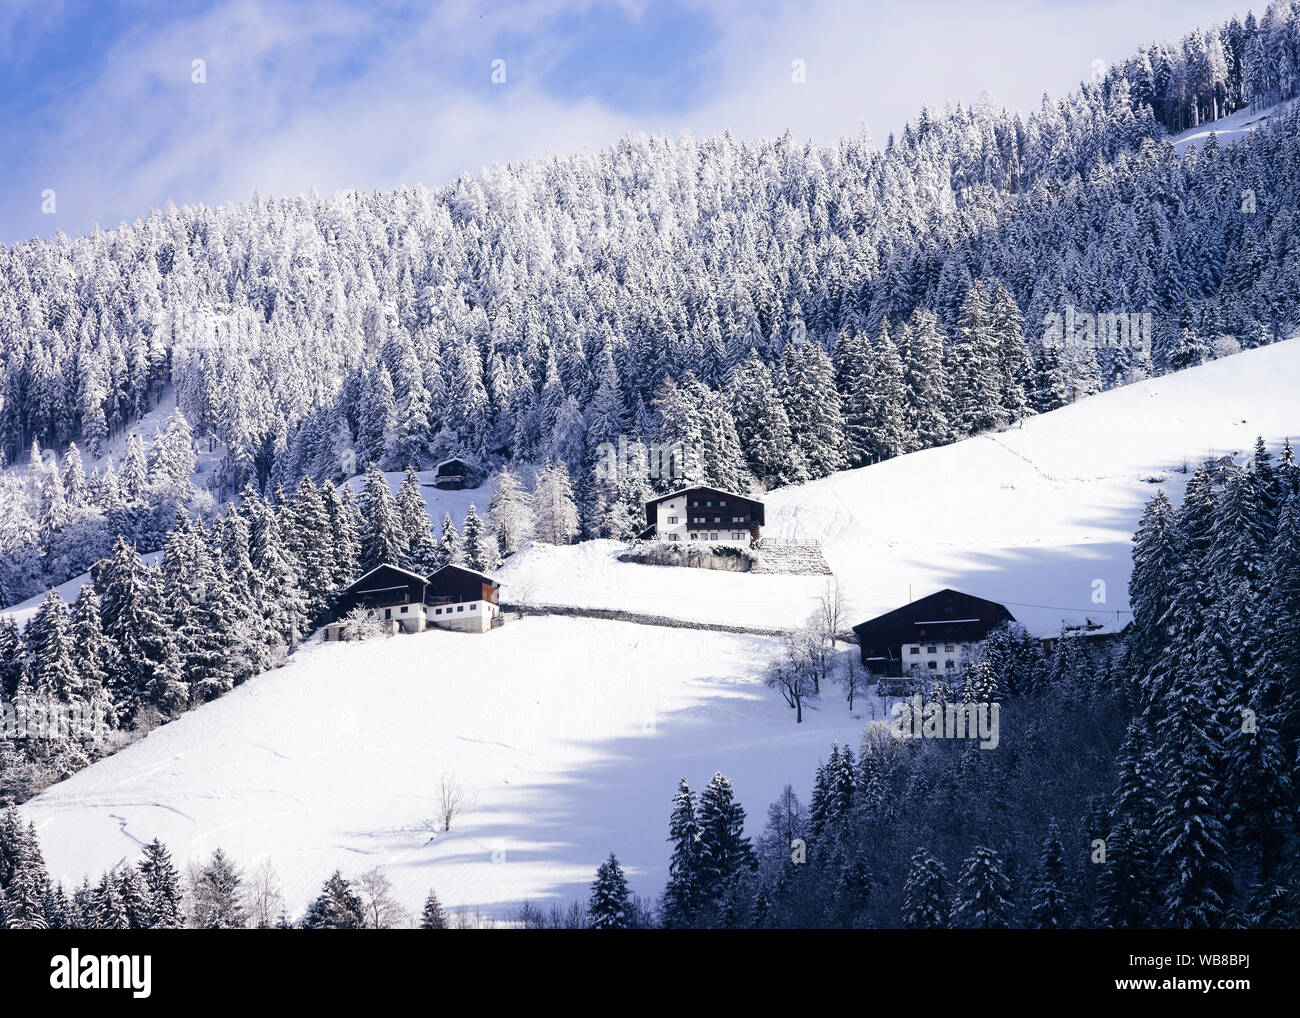 Scenery with snowy winter landscape of Apls at Mayrhofen in Zillertal valley near Innsbruck in Austria. Cottage houses and Forest with snow view at Al Stock Photo